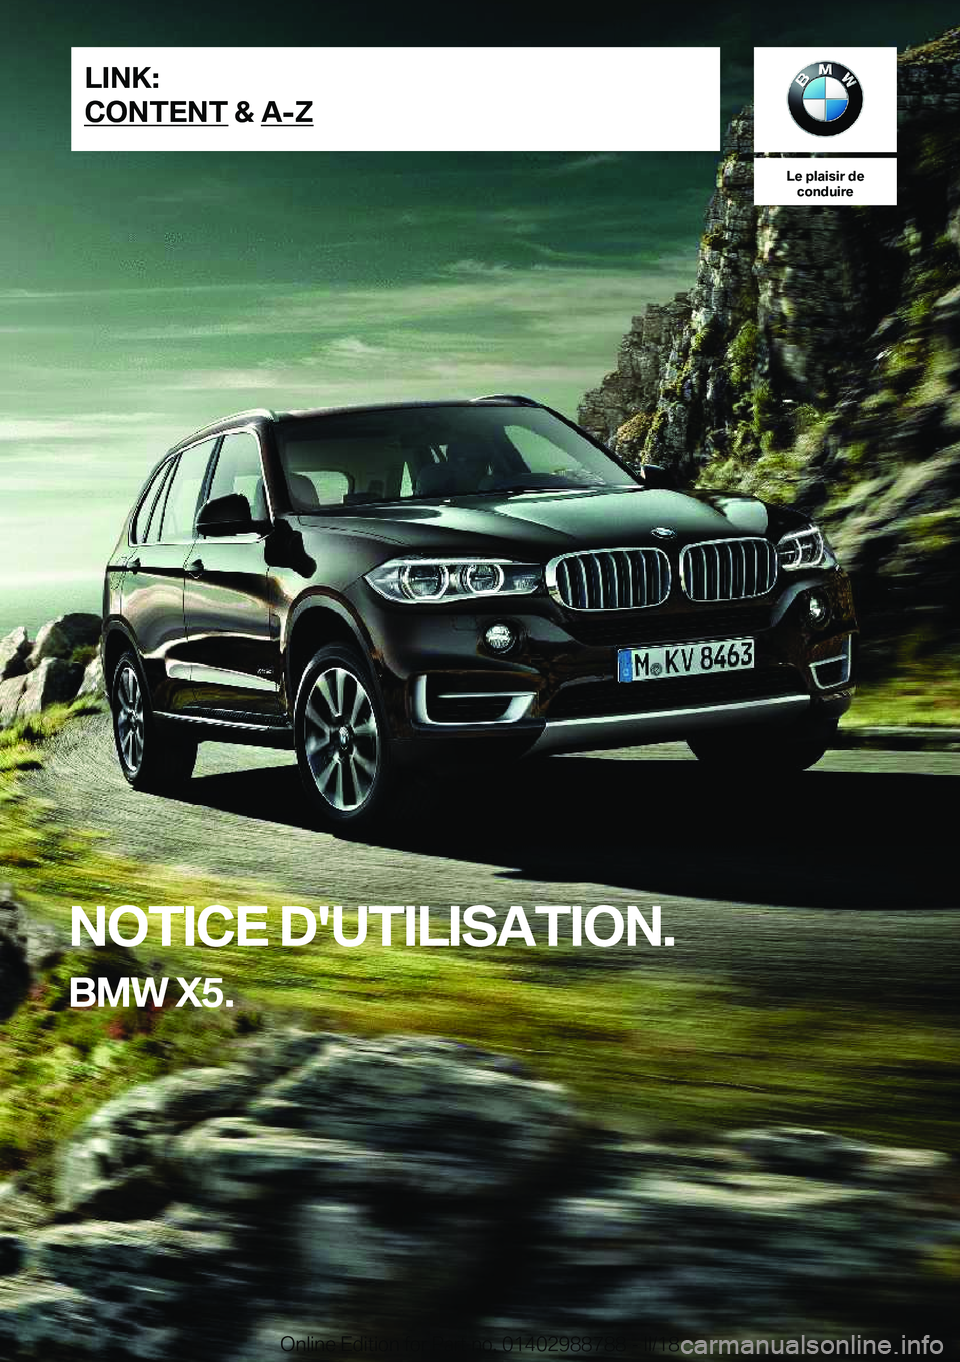 BMW X5 2018  Notices Demploi (in French) �L�e��p�l�a�i�s�i�r��d�e�c�o�n�d�u�i�r�e
�N�O�T�I�C�E��D�'�U�T�I�L�I�S�A�T�I�O�N�.
�B�M�W��X�5�.�L�I�N�K�:
�C�O�N�T�E�N�T��&��A�-�Z�O�n�l�i�n�e� �E�d�i�t�i�o�n� �f�o�r� �P�a�r�t� �n�o�.� �0�